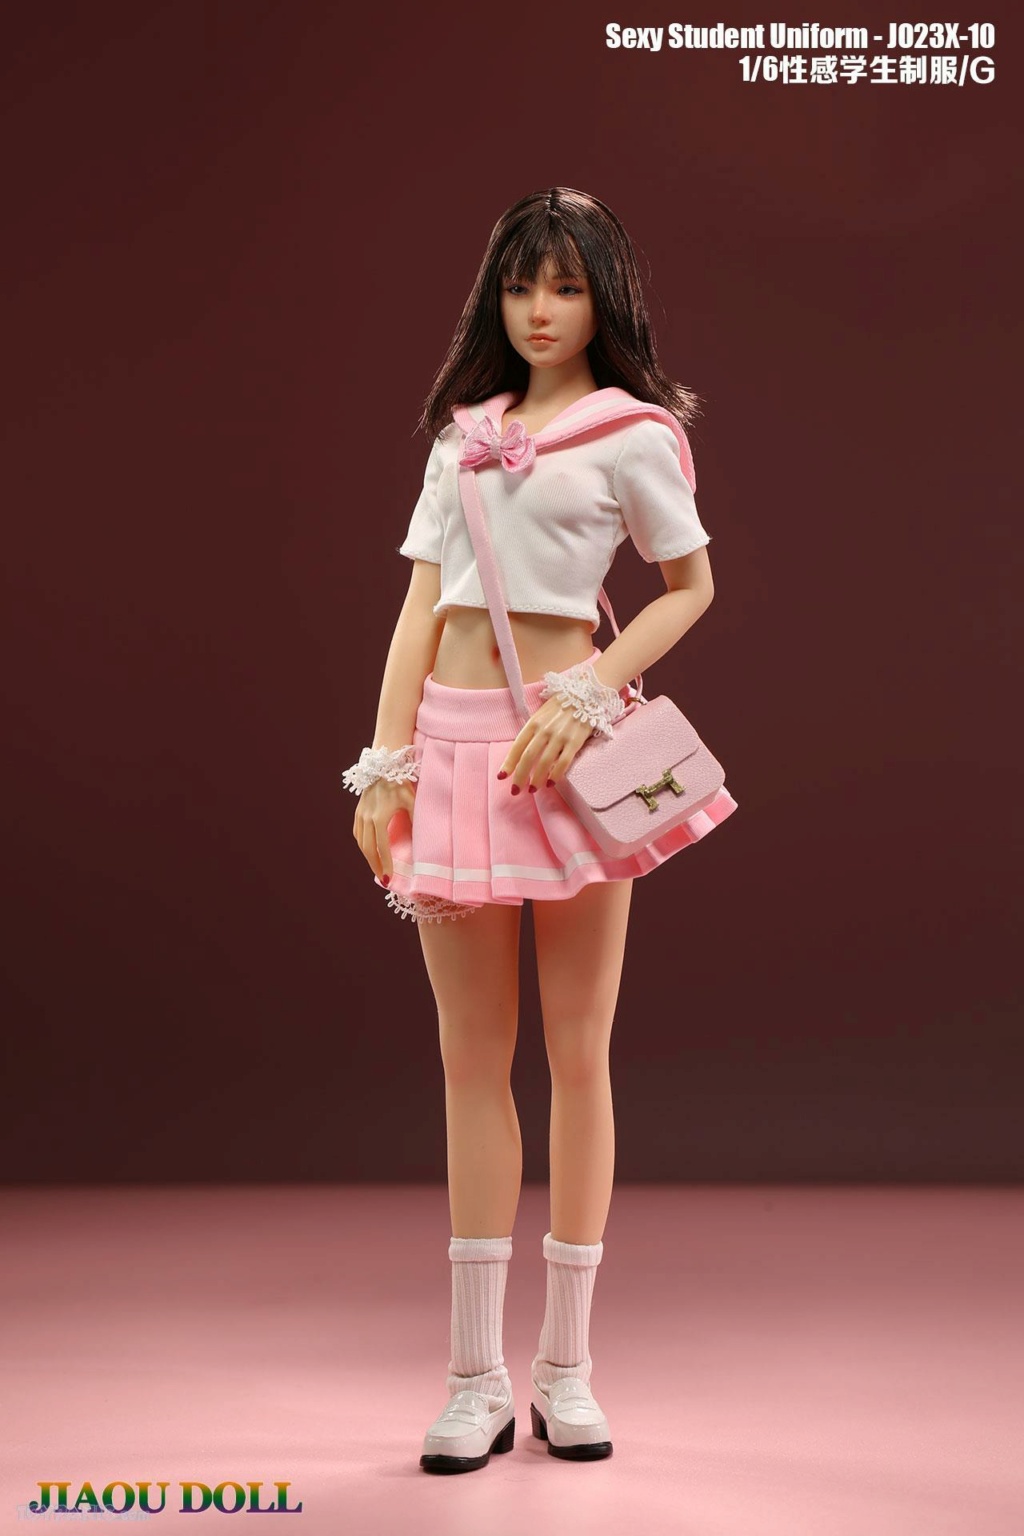 SexyStudentUniform - NEW PRODUCT: Jiaou Doll: 1/6 Sexy Student Uniform (7 color options) (JO23X-10A-G) (NSFW) 20920242